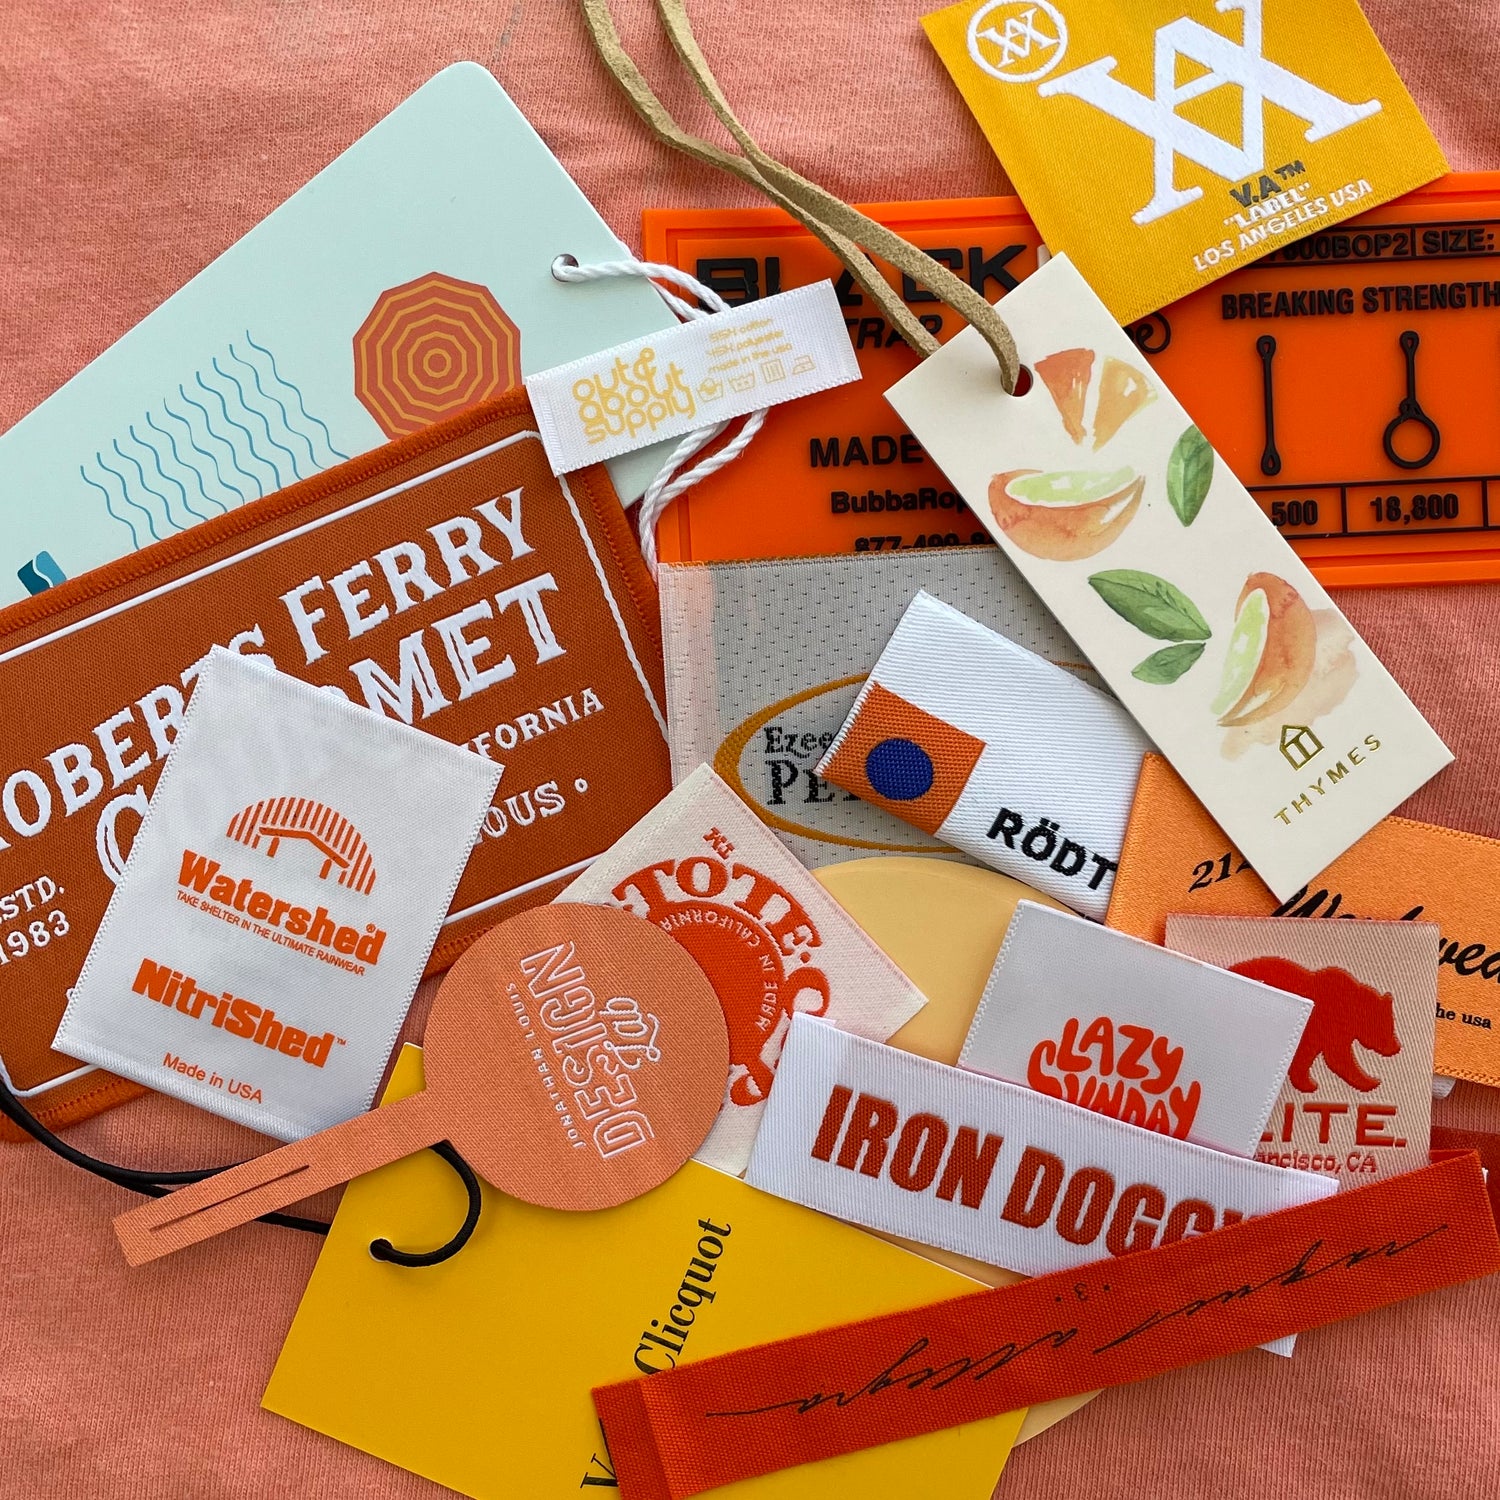 Best Quality clothing labels online | Clothing Label Source for Woven and Printed Tags | CruzLabel | woven, printed, heat transfer, hang tags and much more!